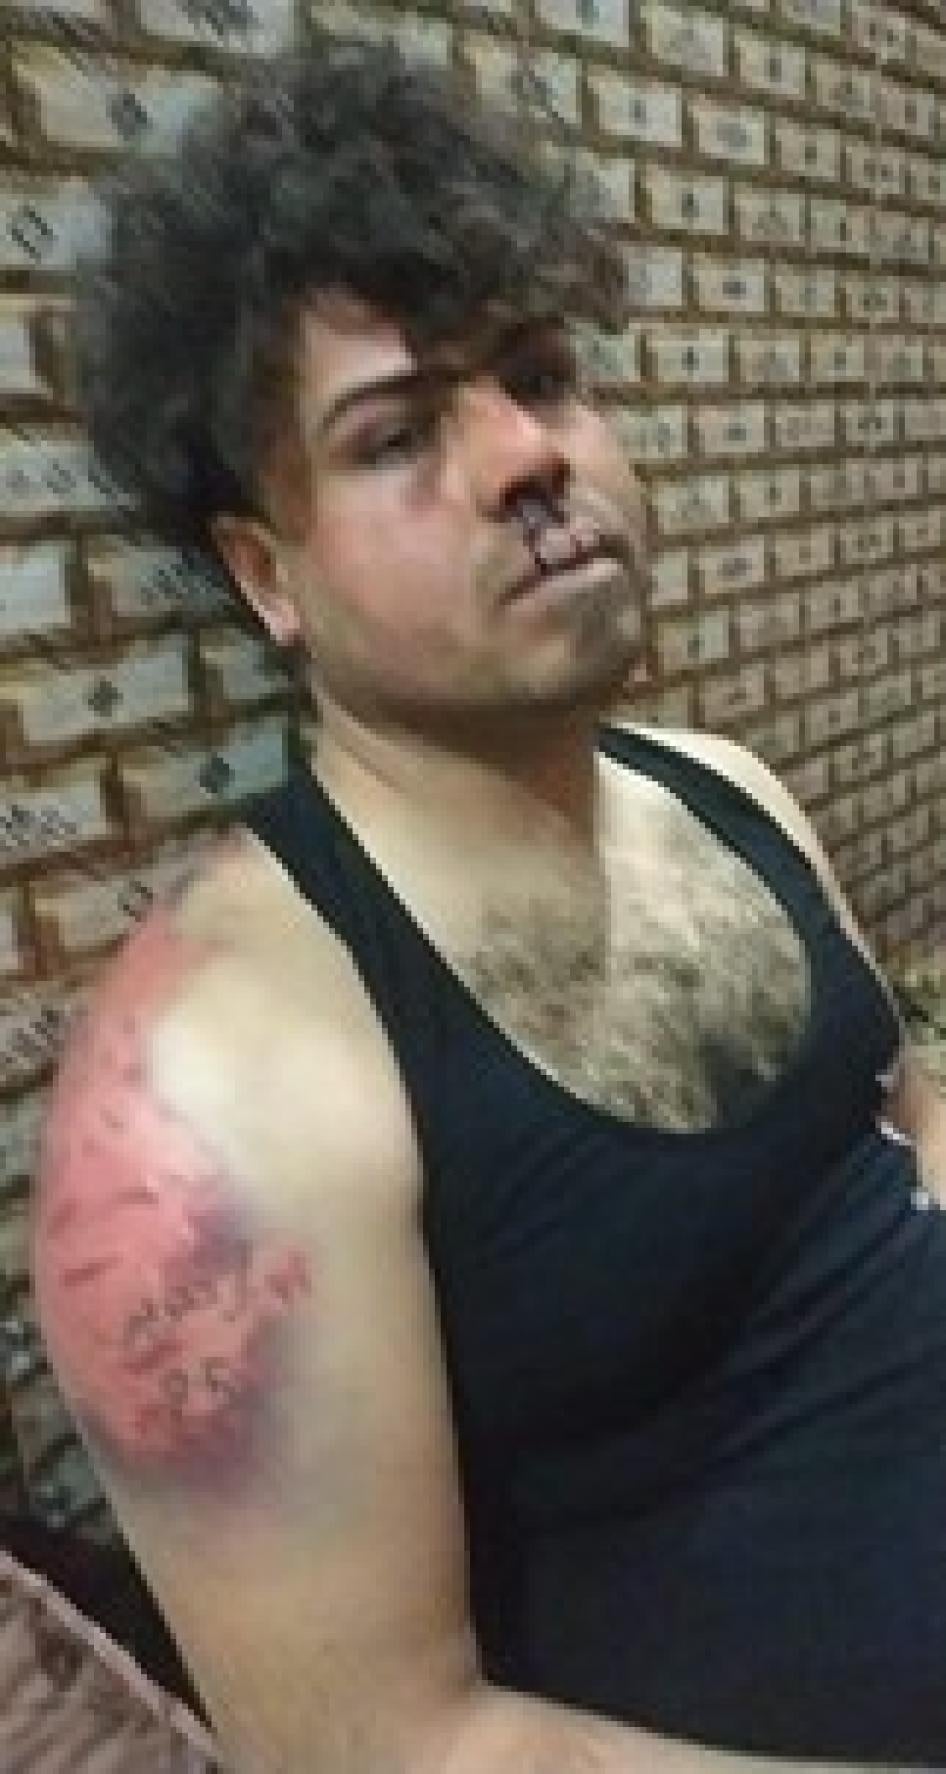 Ali Naseer Alawy, after armed masked men beat him and used an acid mixture to try to remove a tattoo on his arm.